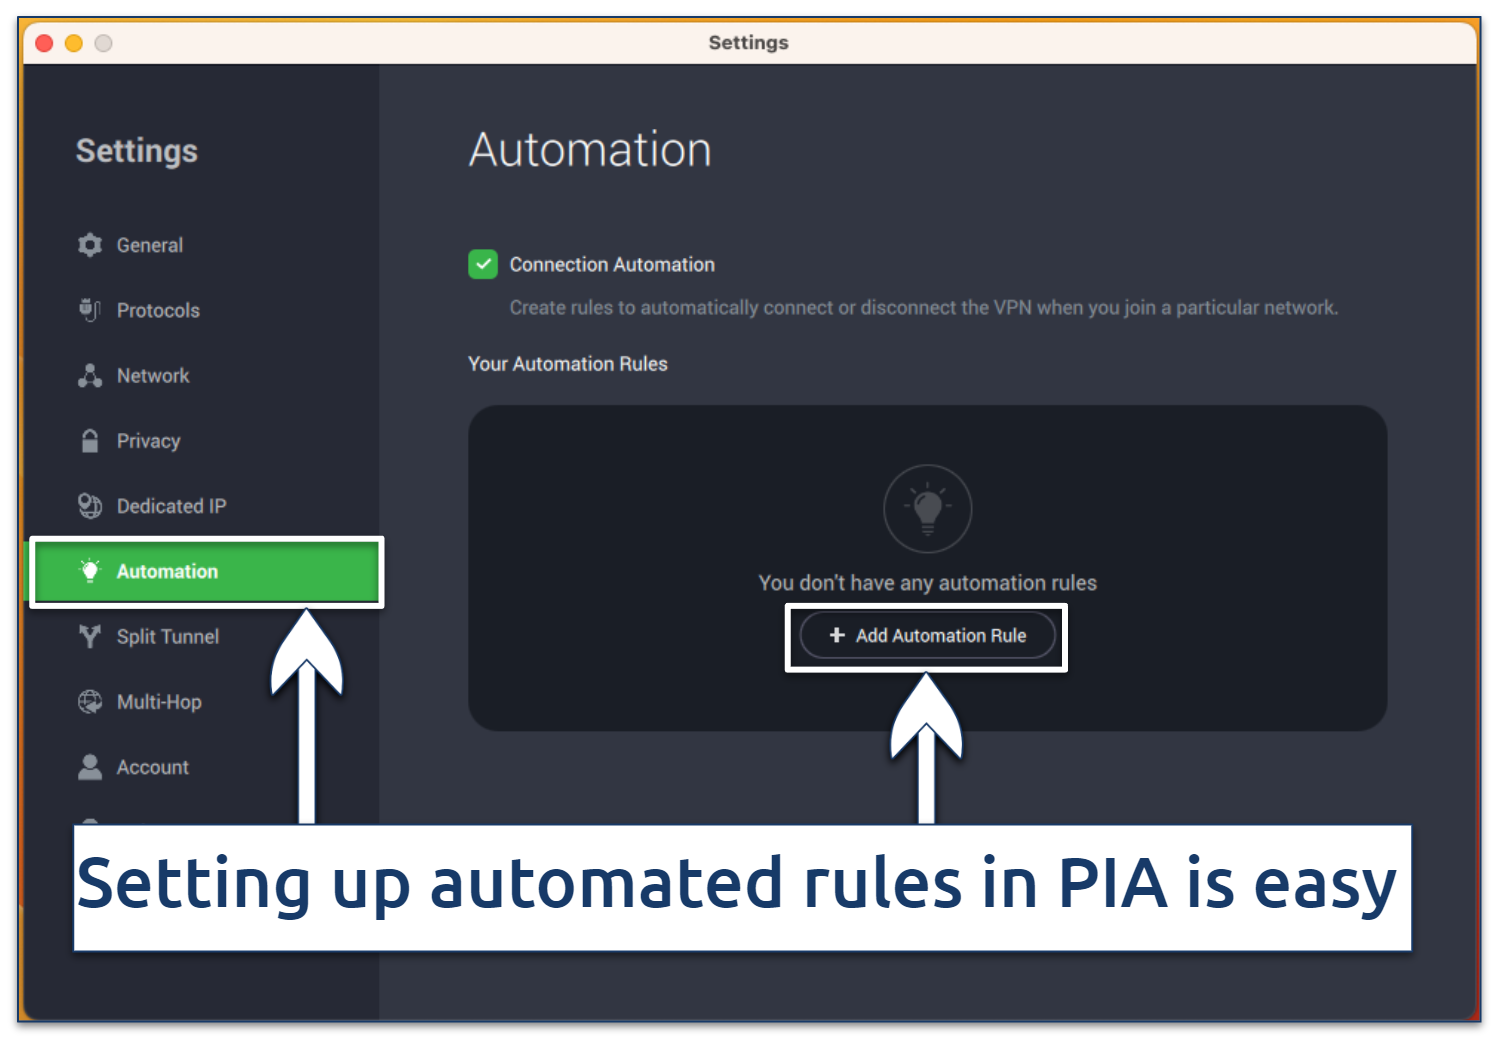 Screenshot of PIA's automation rules in the settings